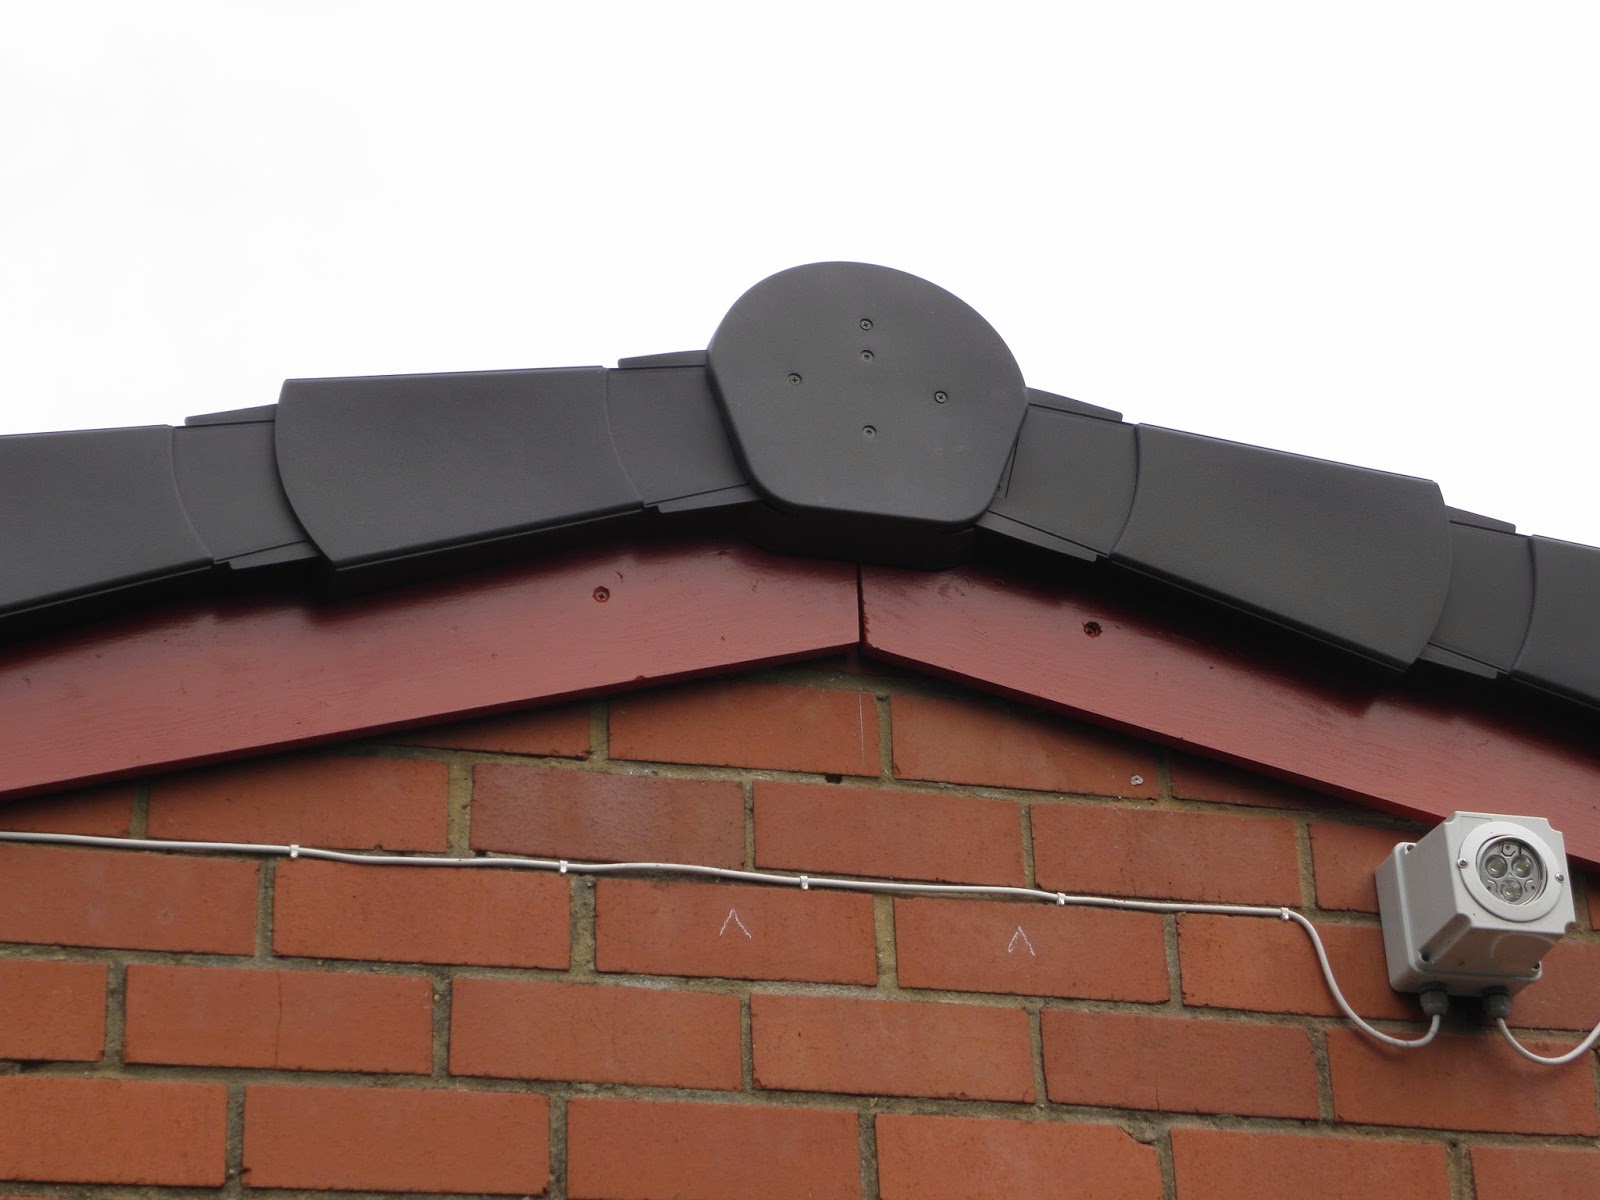 where eagles fear to perch Fitting a Roof Dry Verge / Roof Tile Edging System....